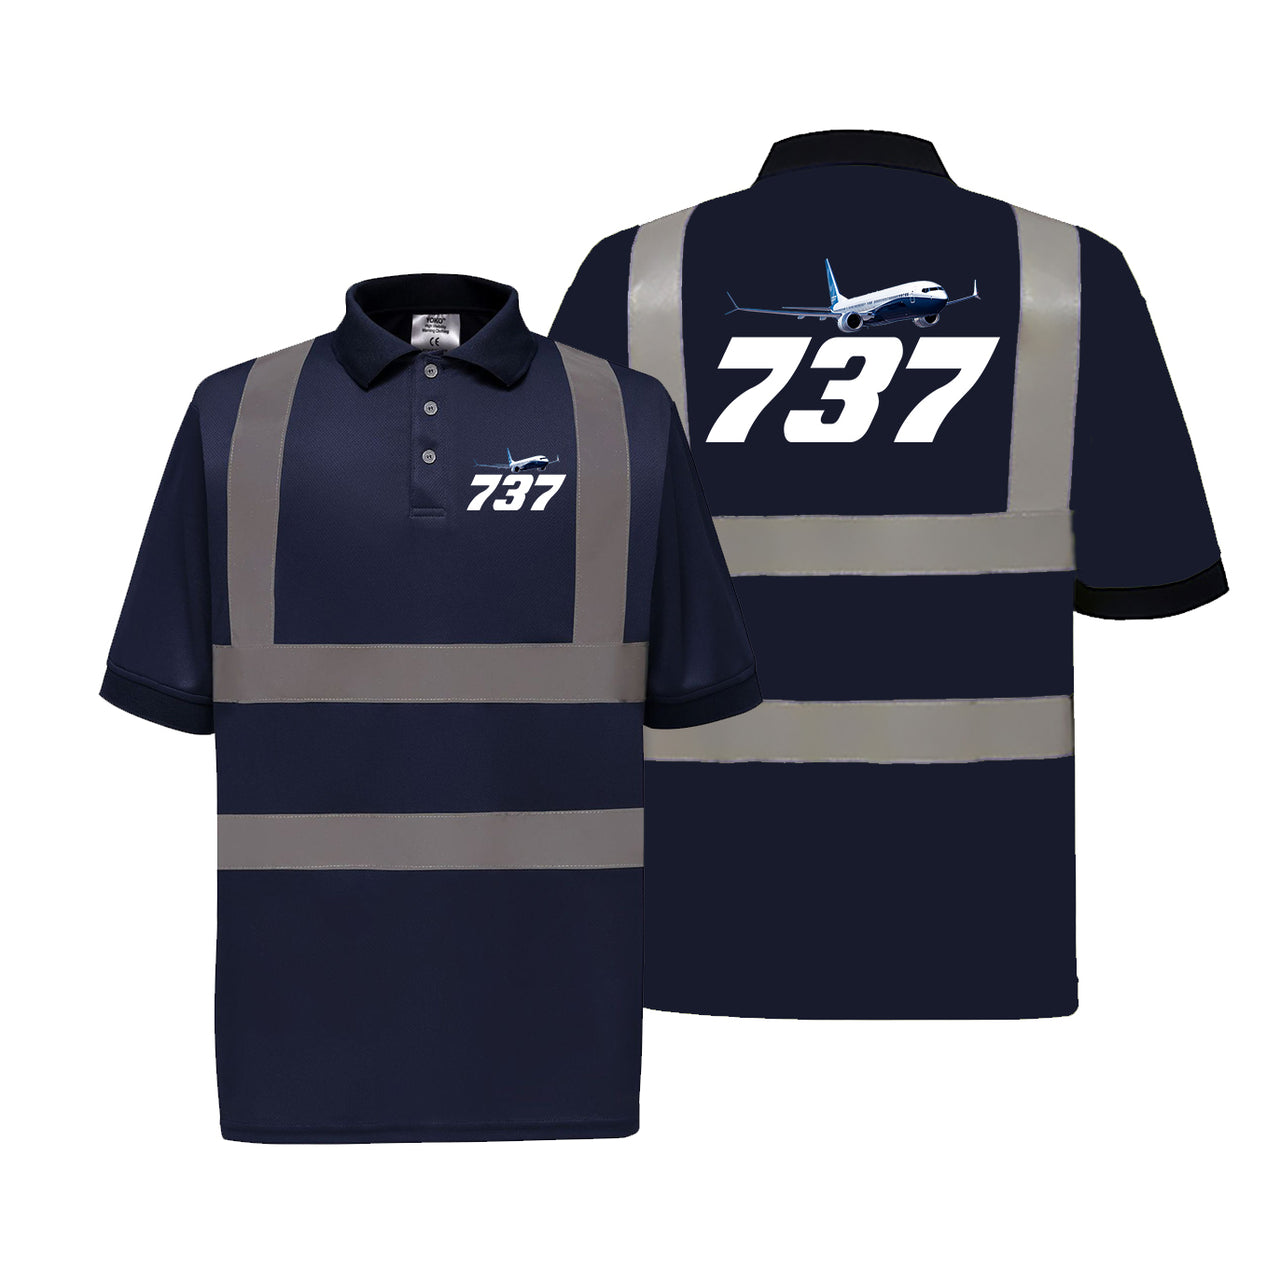 Super Boeing 737-800 Designed Reflective Polo T-Shirts